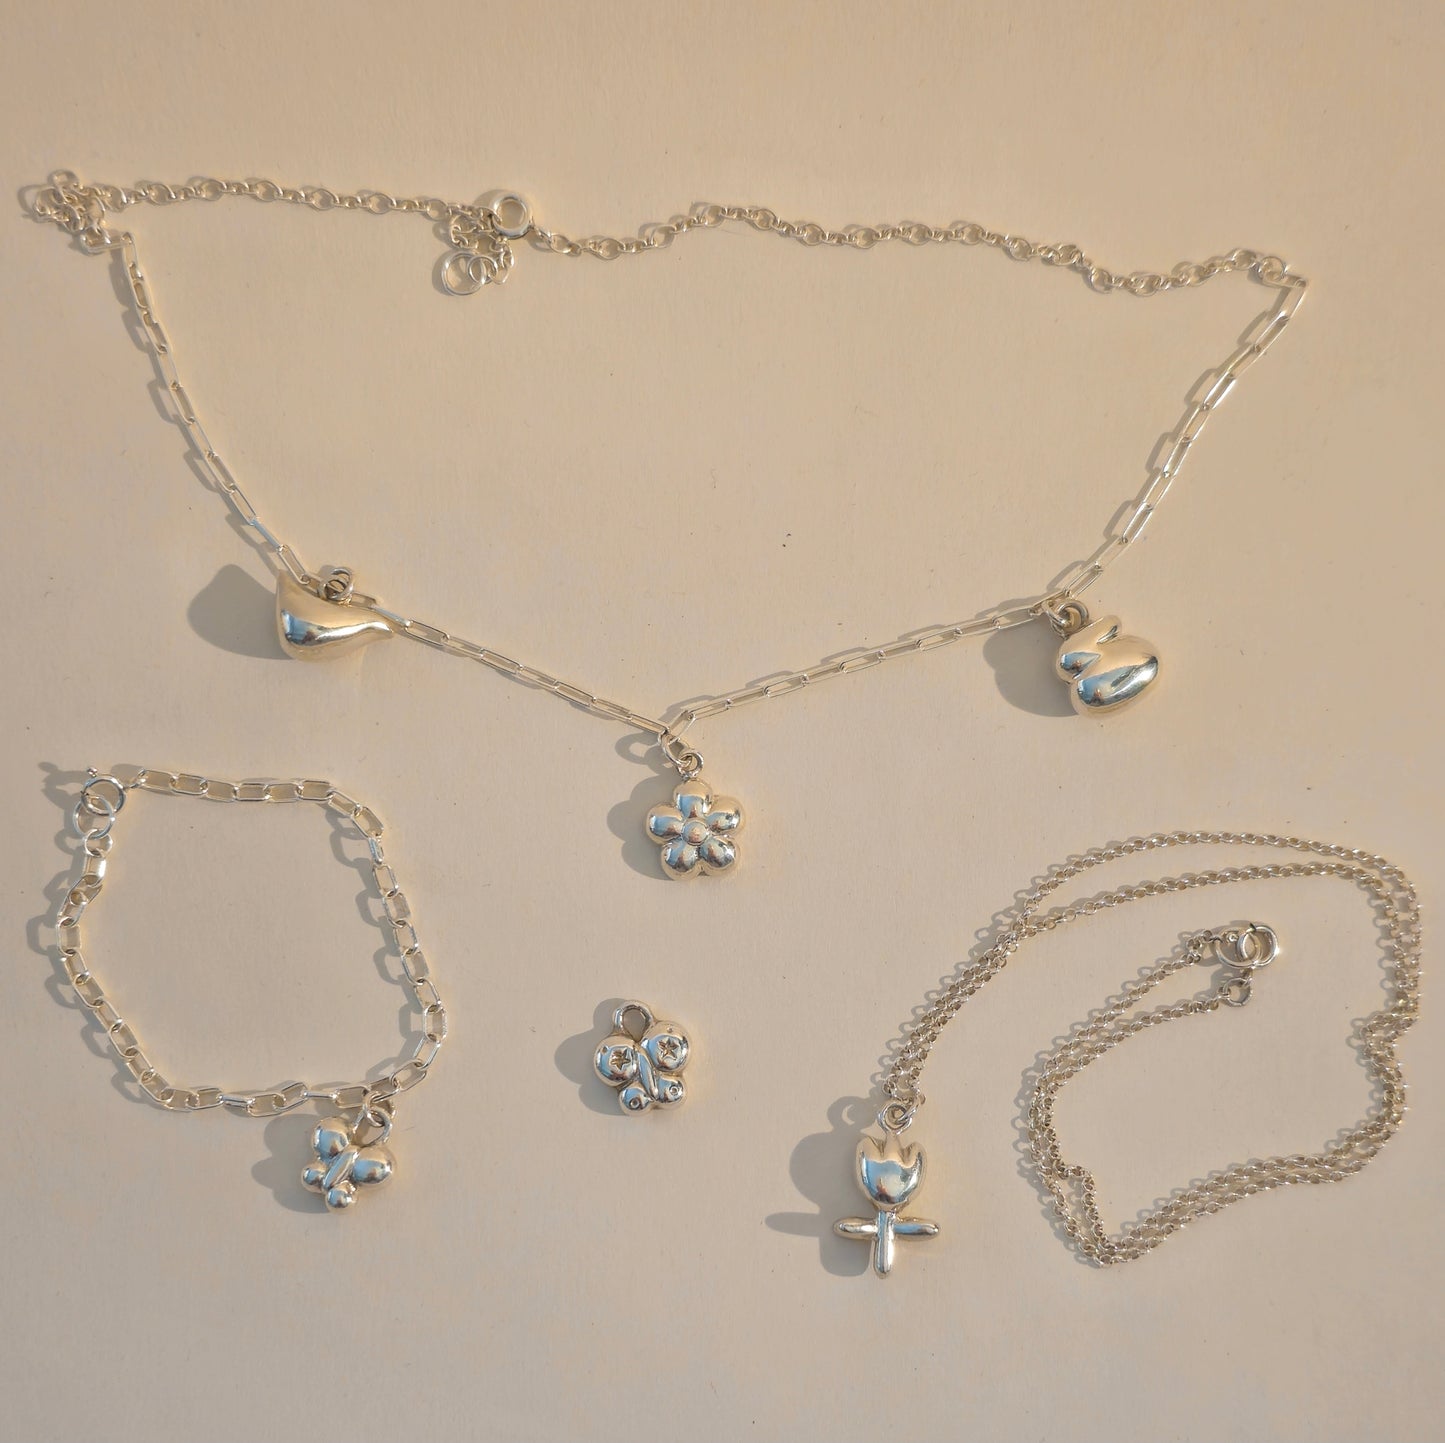 Necklace and Bracelet Chains